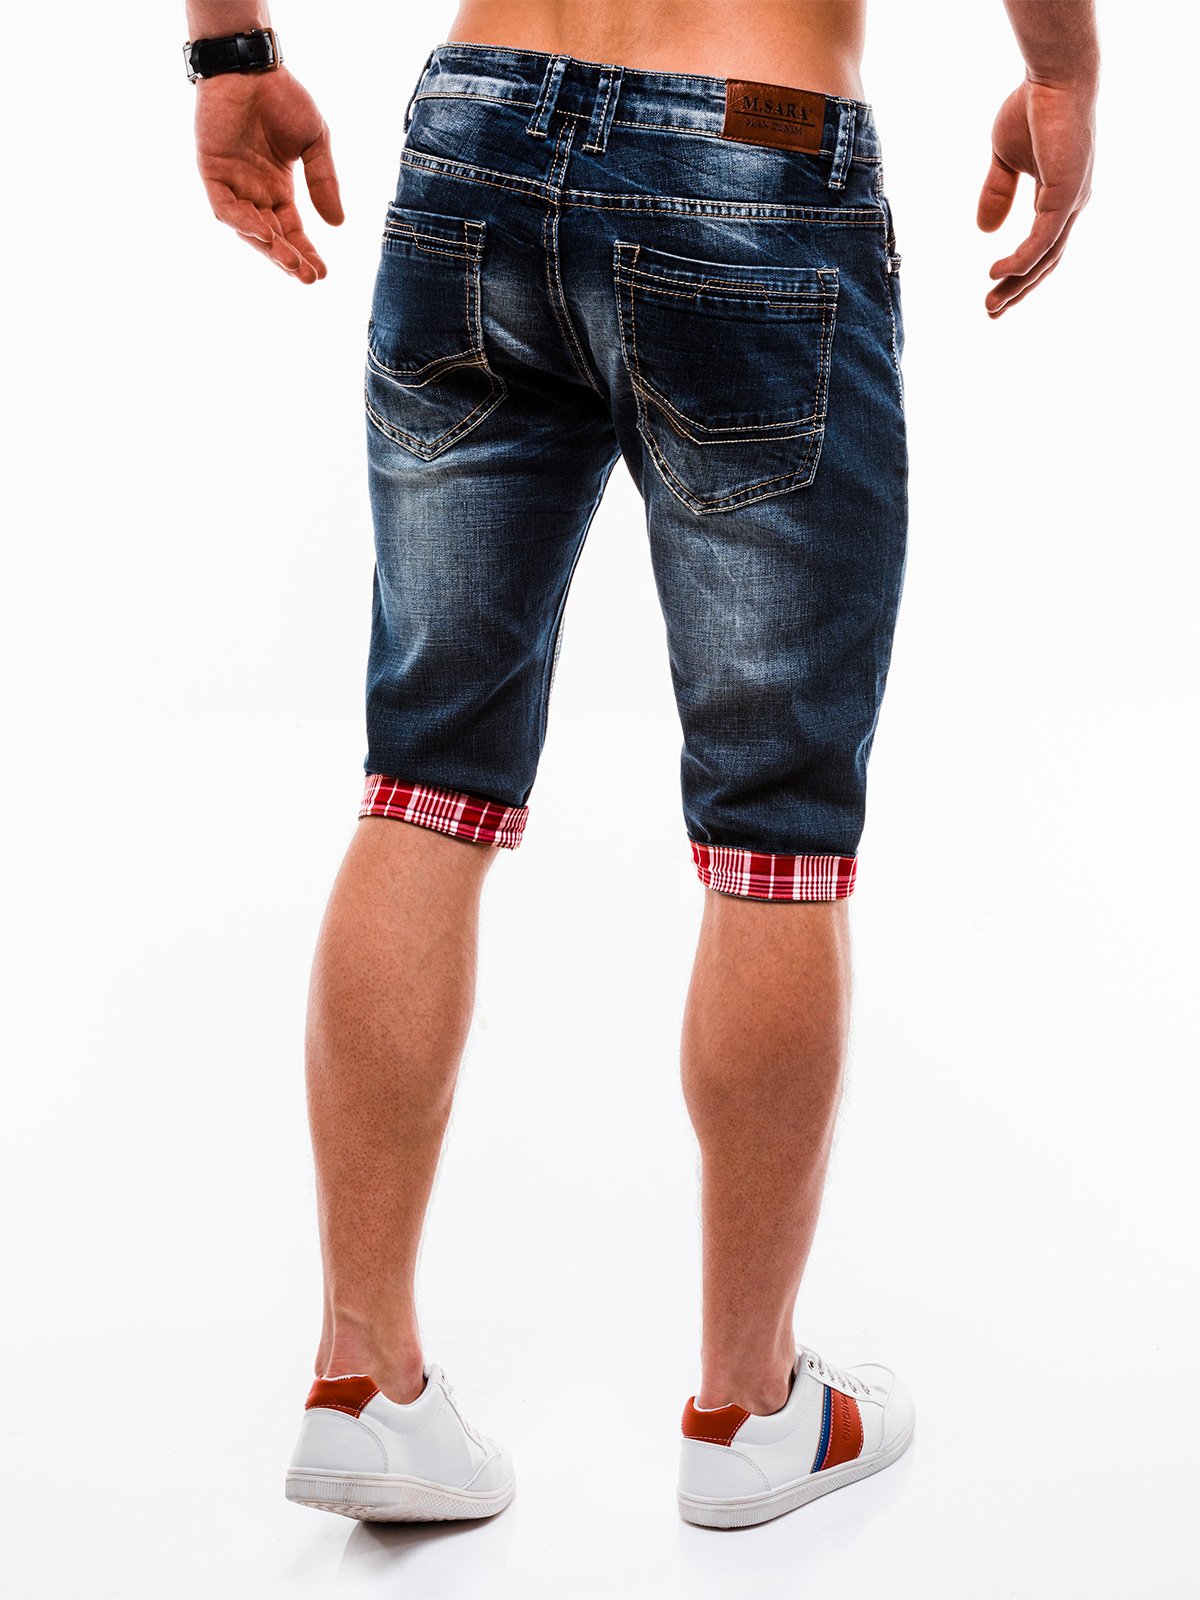 mens red jean shorts